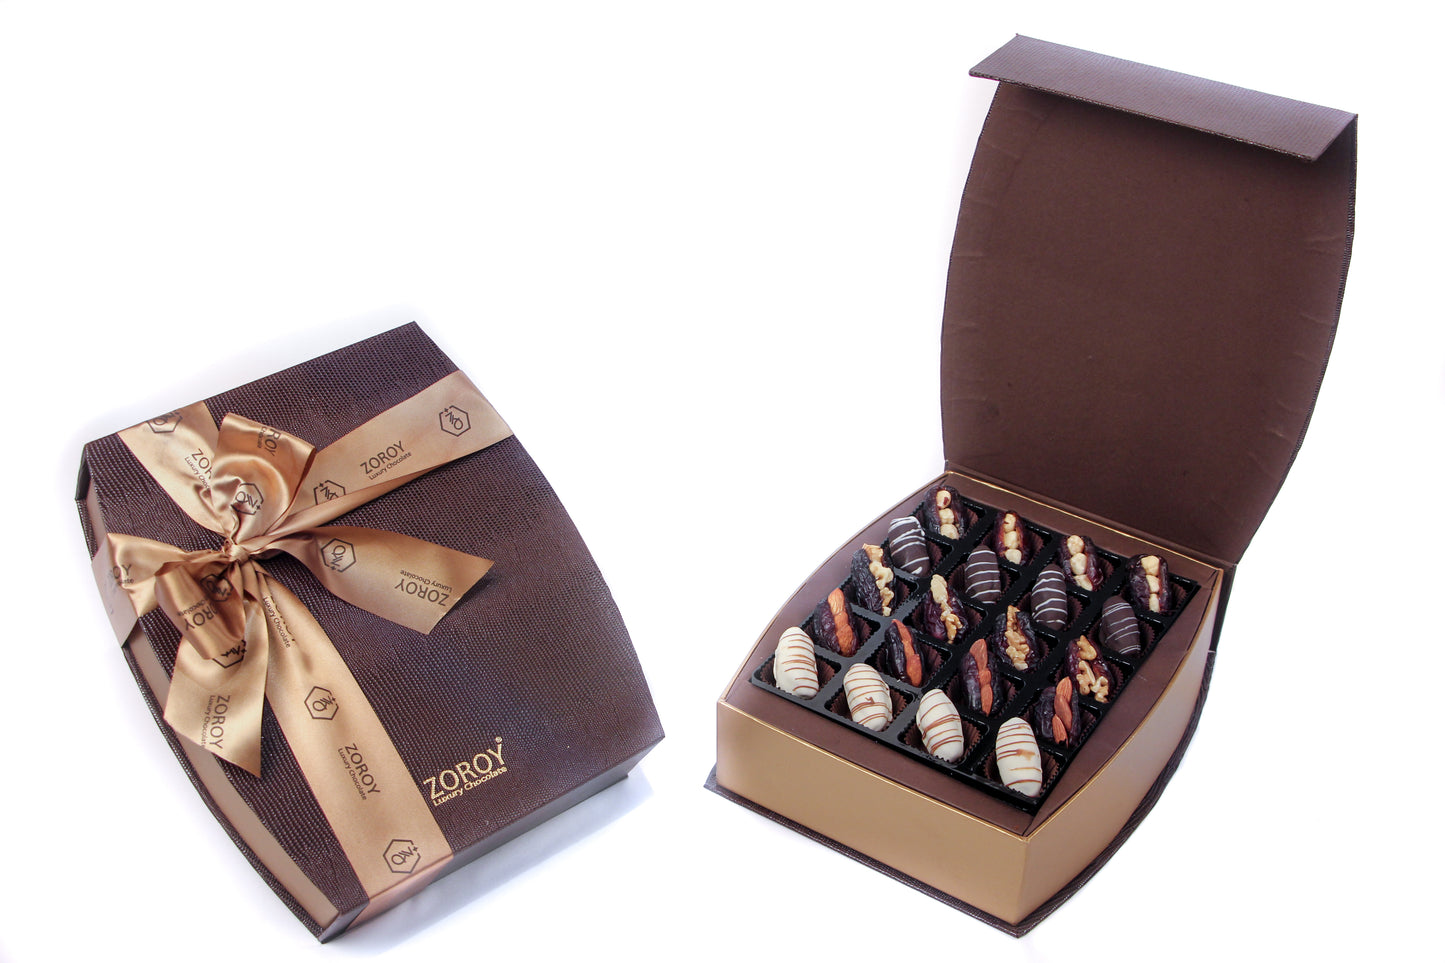 ZOROY Lather finish box with Chocolate Coated Dates with Dry Fruits Gift Box for Eid & Ramzan - 300 Gms